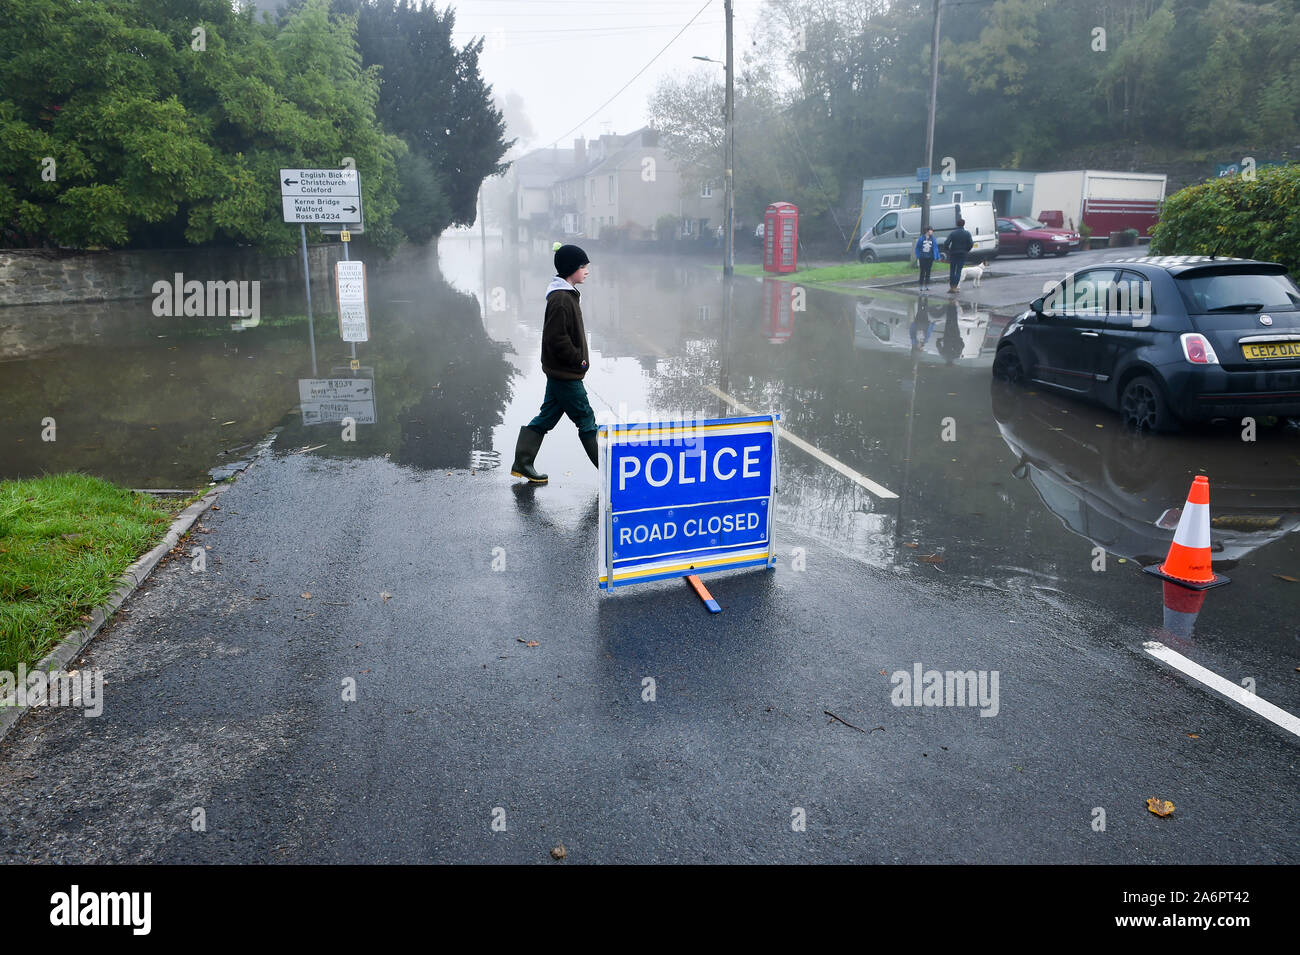 A person walks past a police road closure sign in Lower Lydbrook, where rain from the Welsh hills and high tides have flooded the village, which sits next to the banks of the River Wye, rendering it impassable. Stock Photo